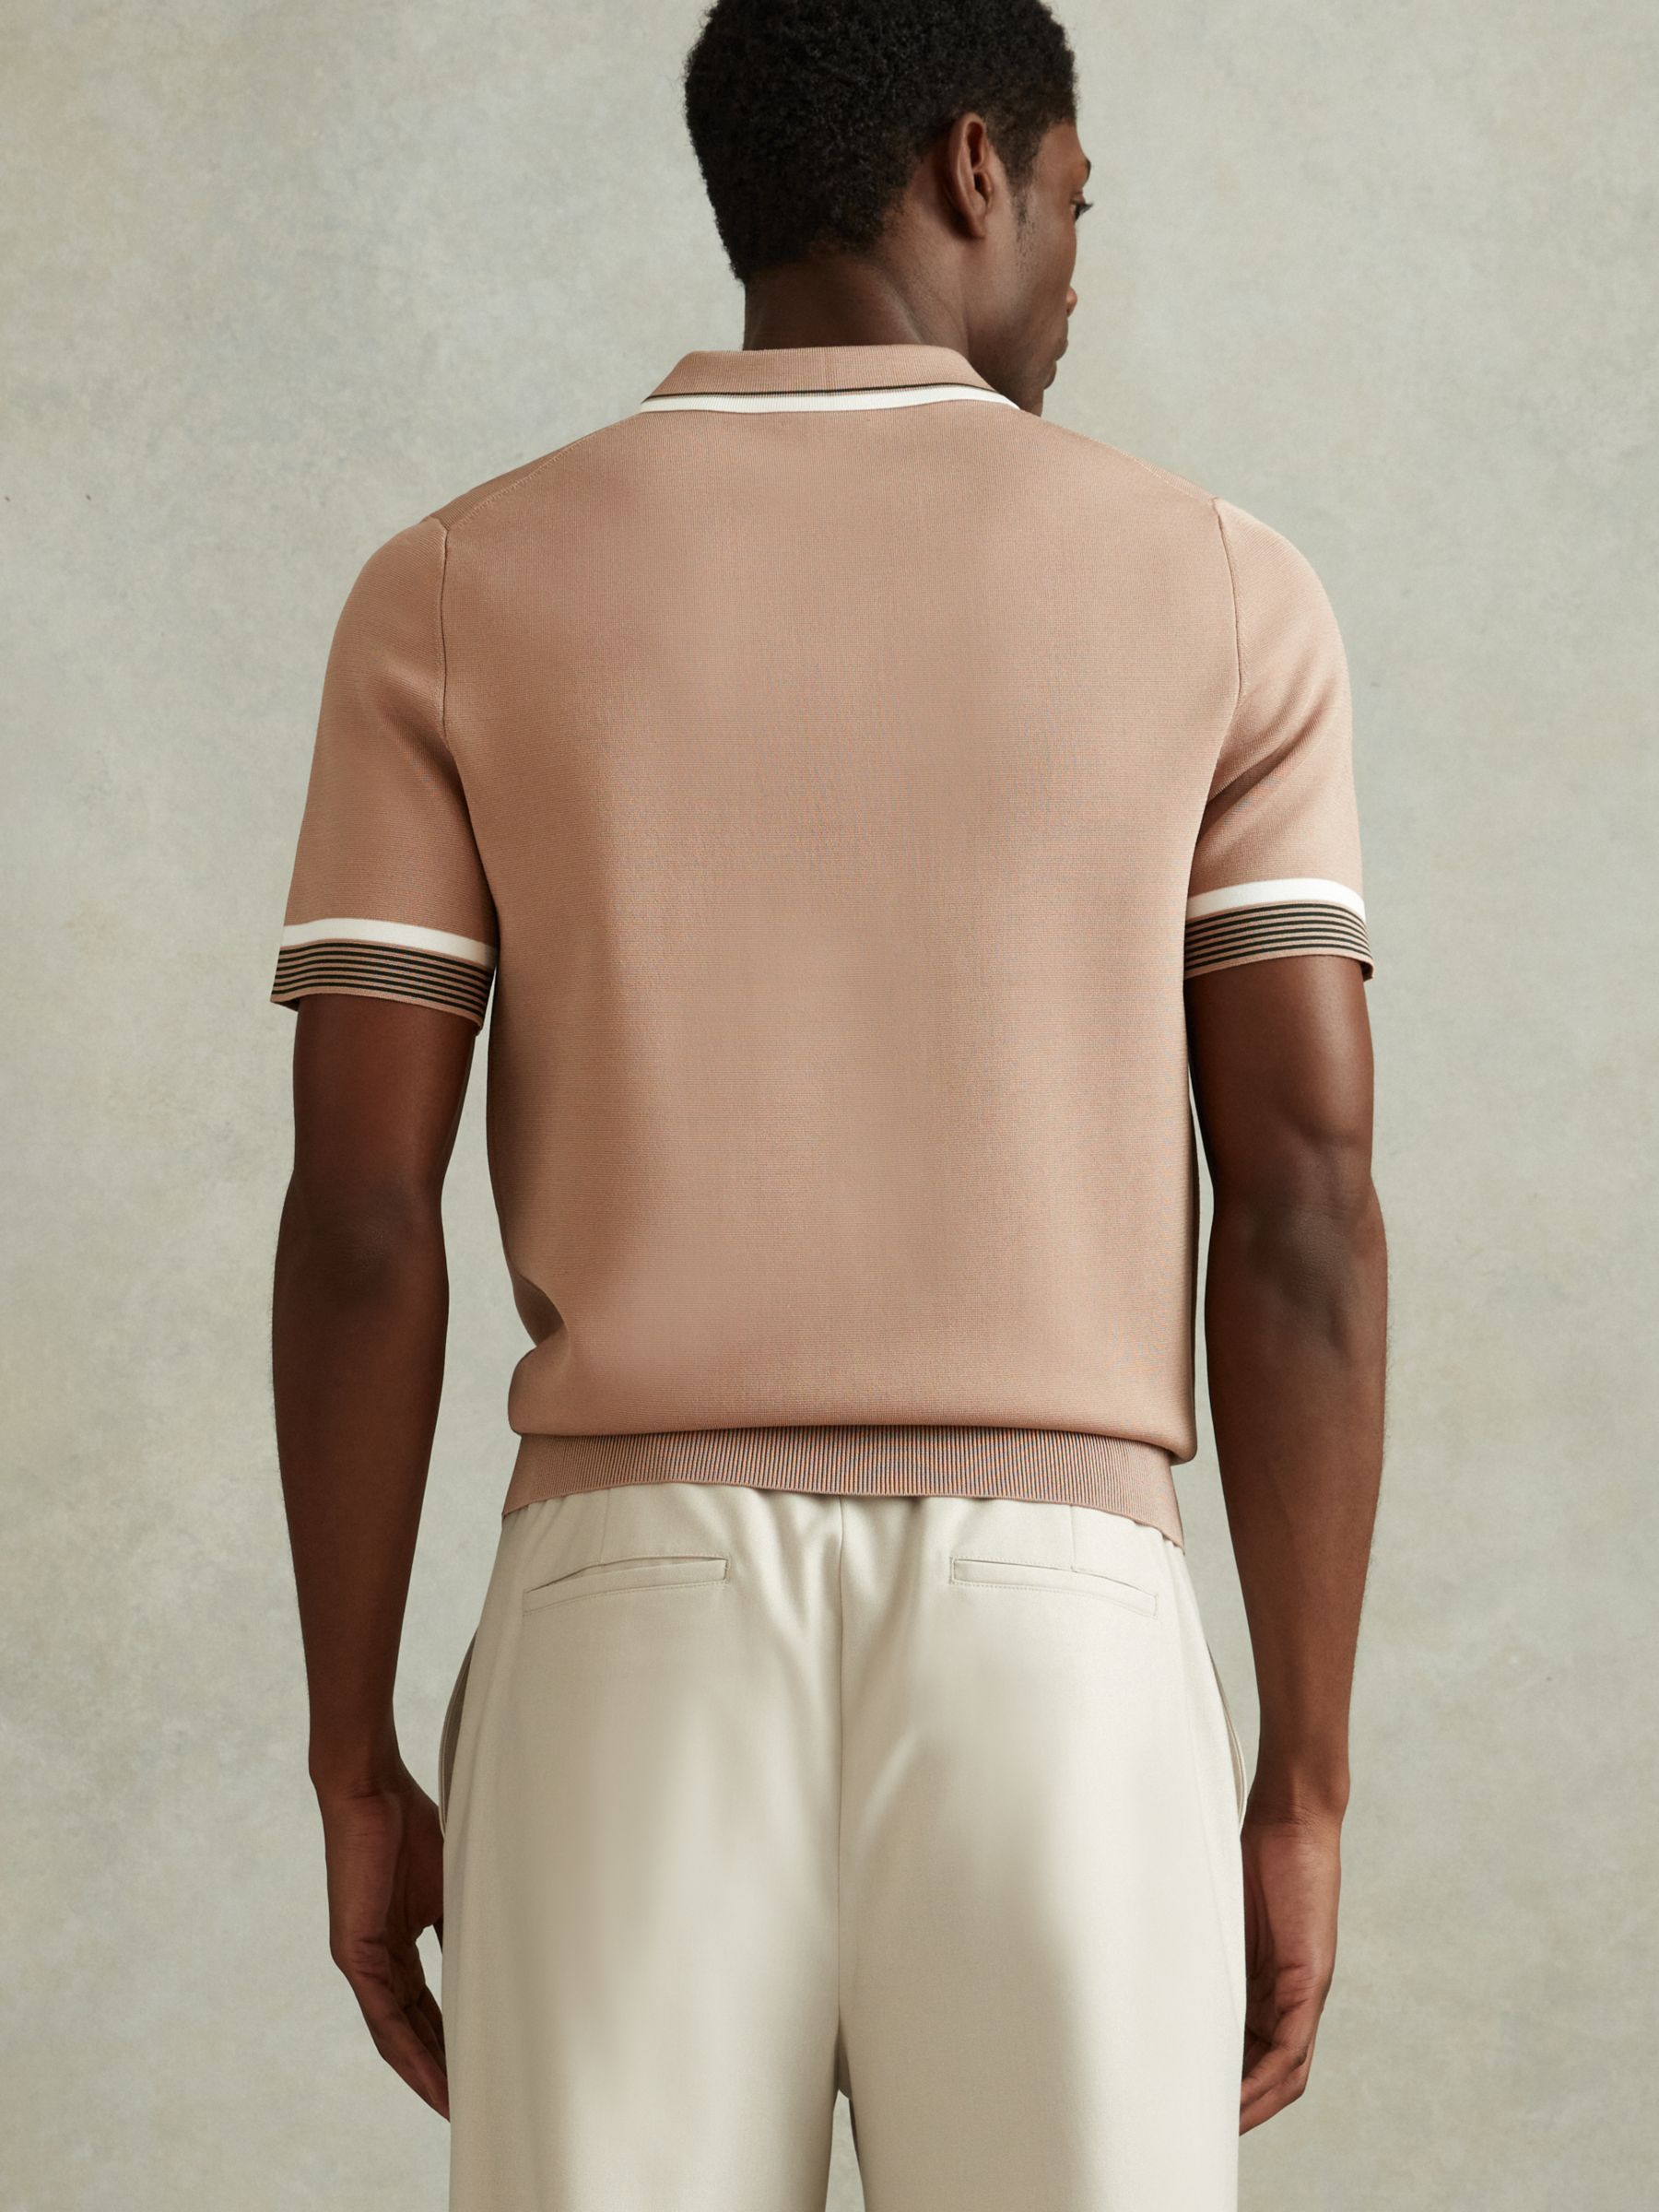 Buy Reiss Chelsea Short Sleeve Tipped Half Zip Polo Top, Warm Taupe Online at johnlewis.com